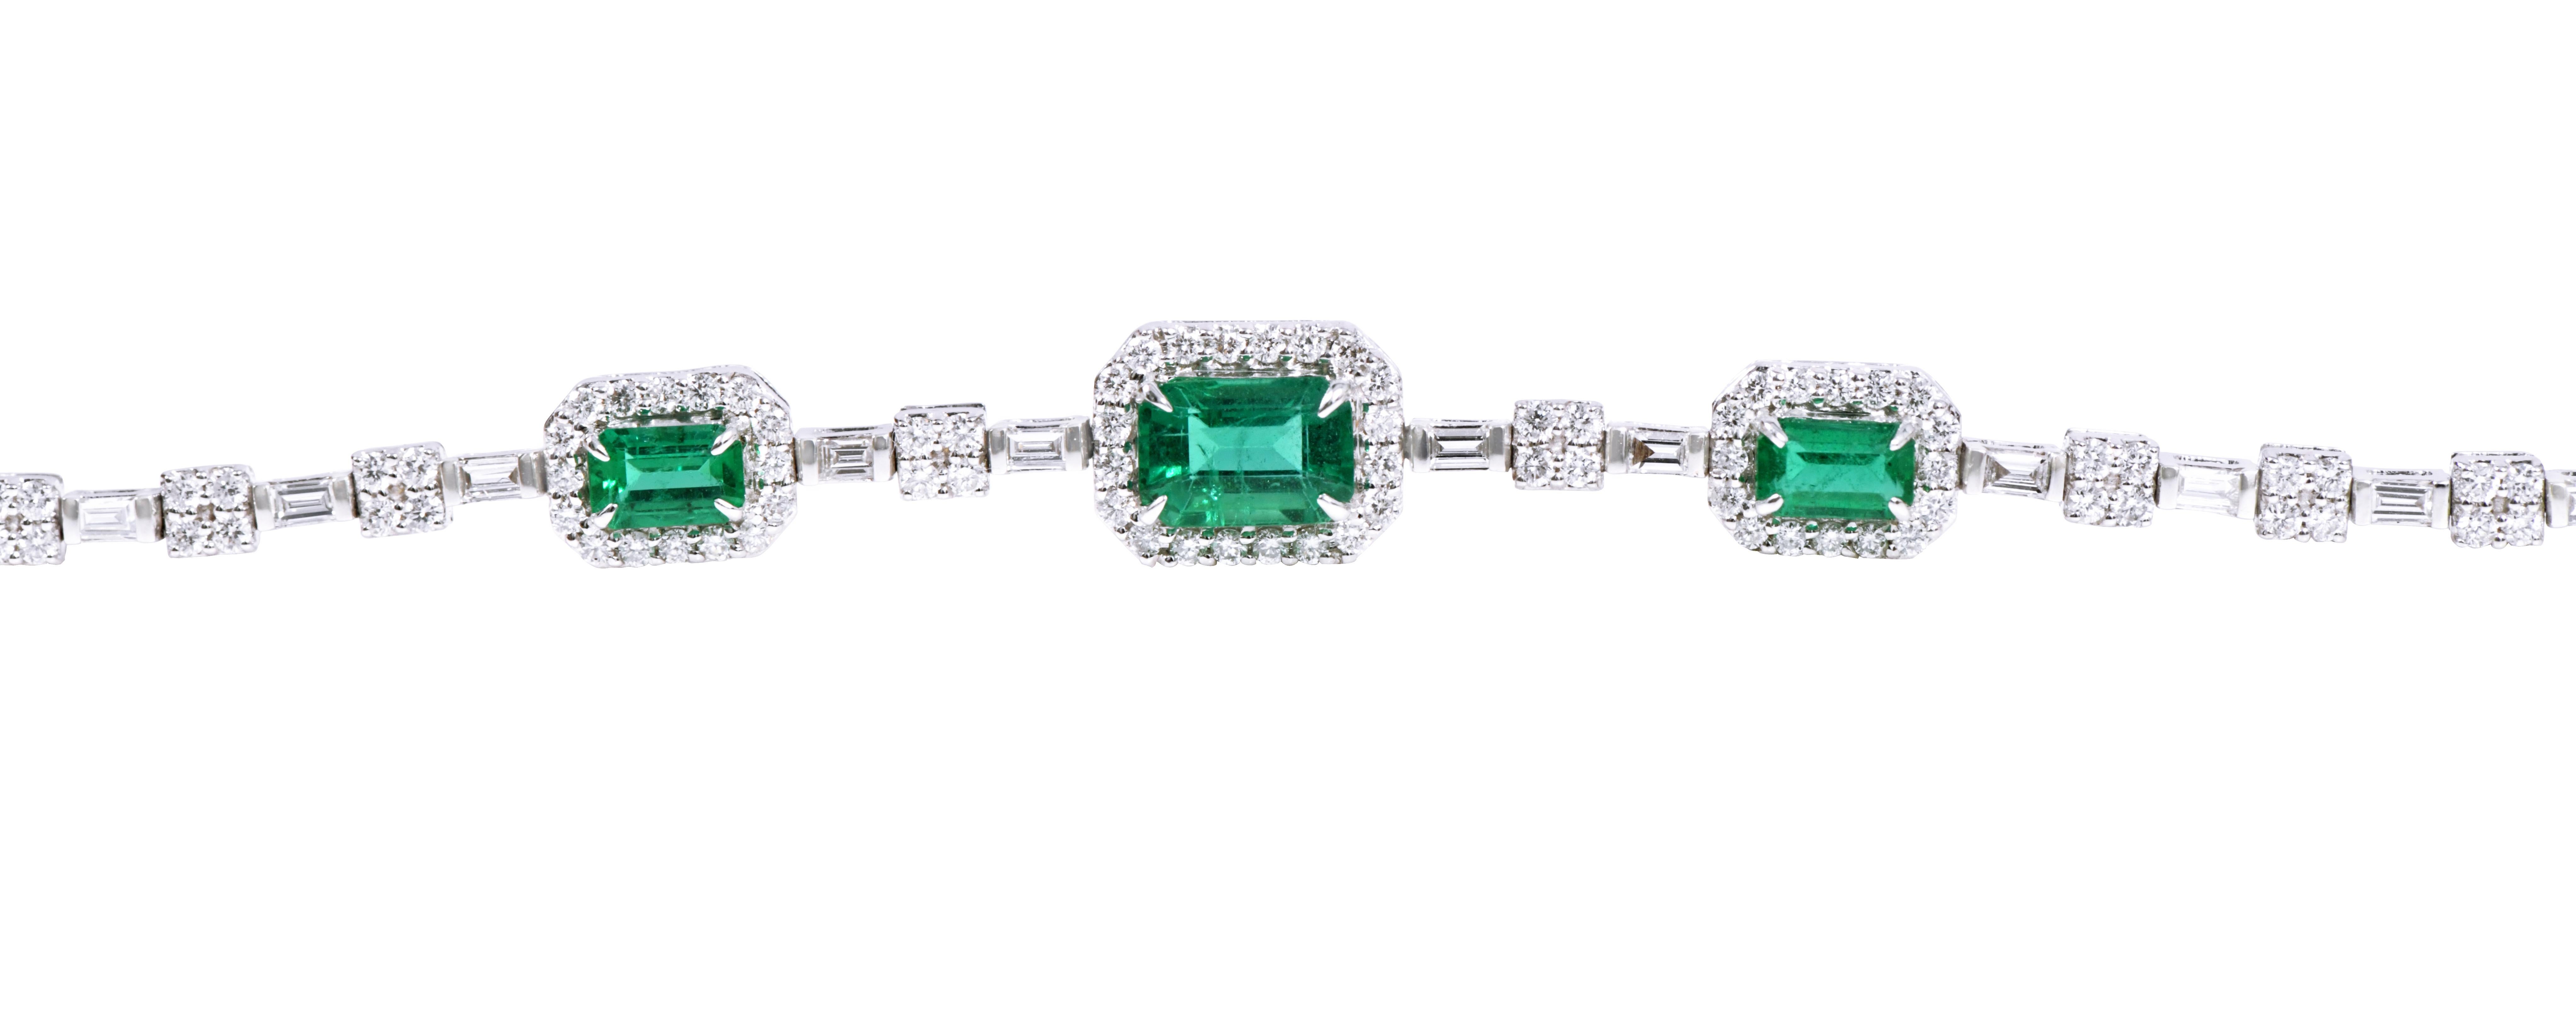 18 Karat White Gold 3.28 Carat Emerald and Diamond Tennis Bracelet

To adorn a royal ensemble and a luxury personality is synonymous with carrying magnificent jewelry garlanded with exquisite gems and diamonds. To make you twirl around in royalty